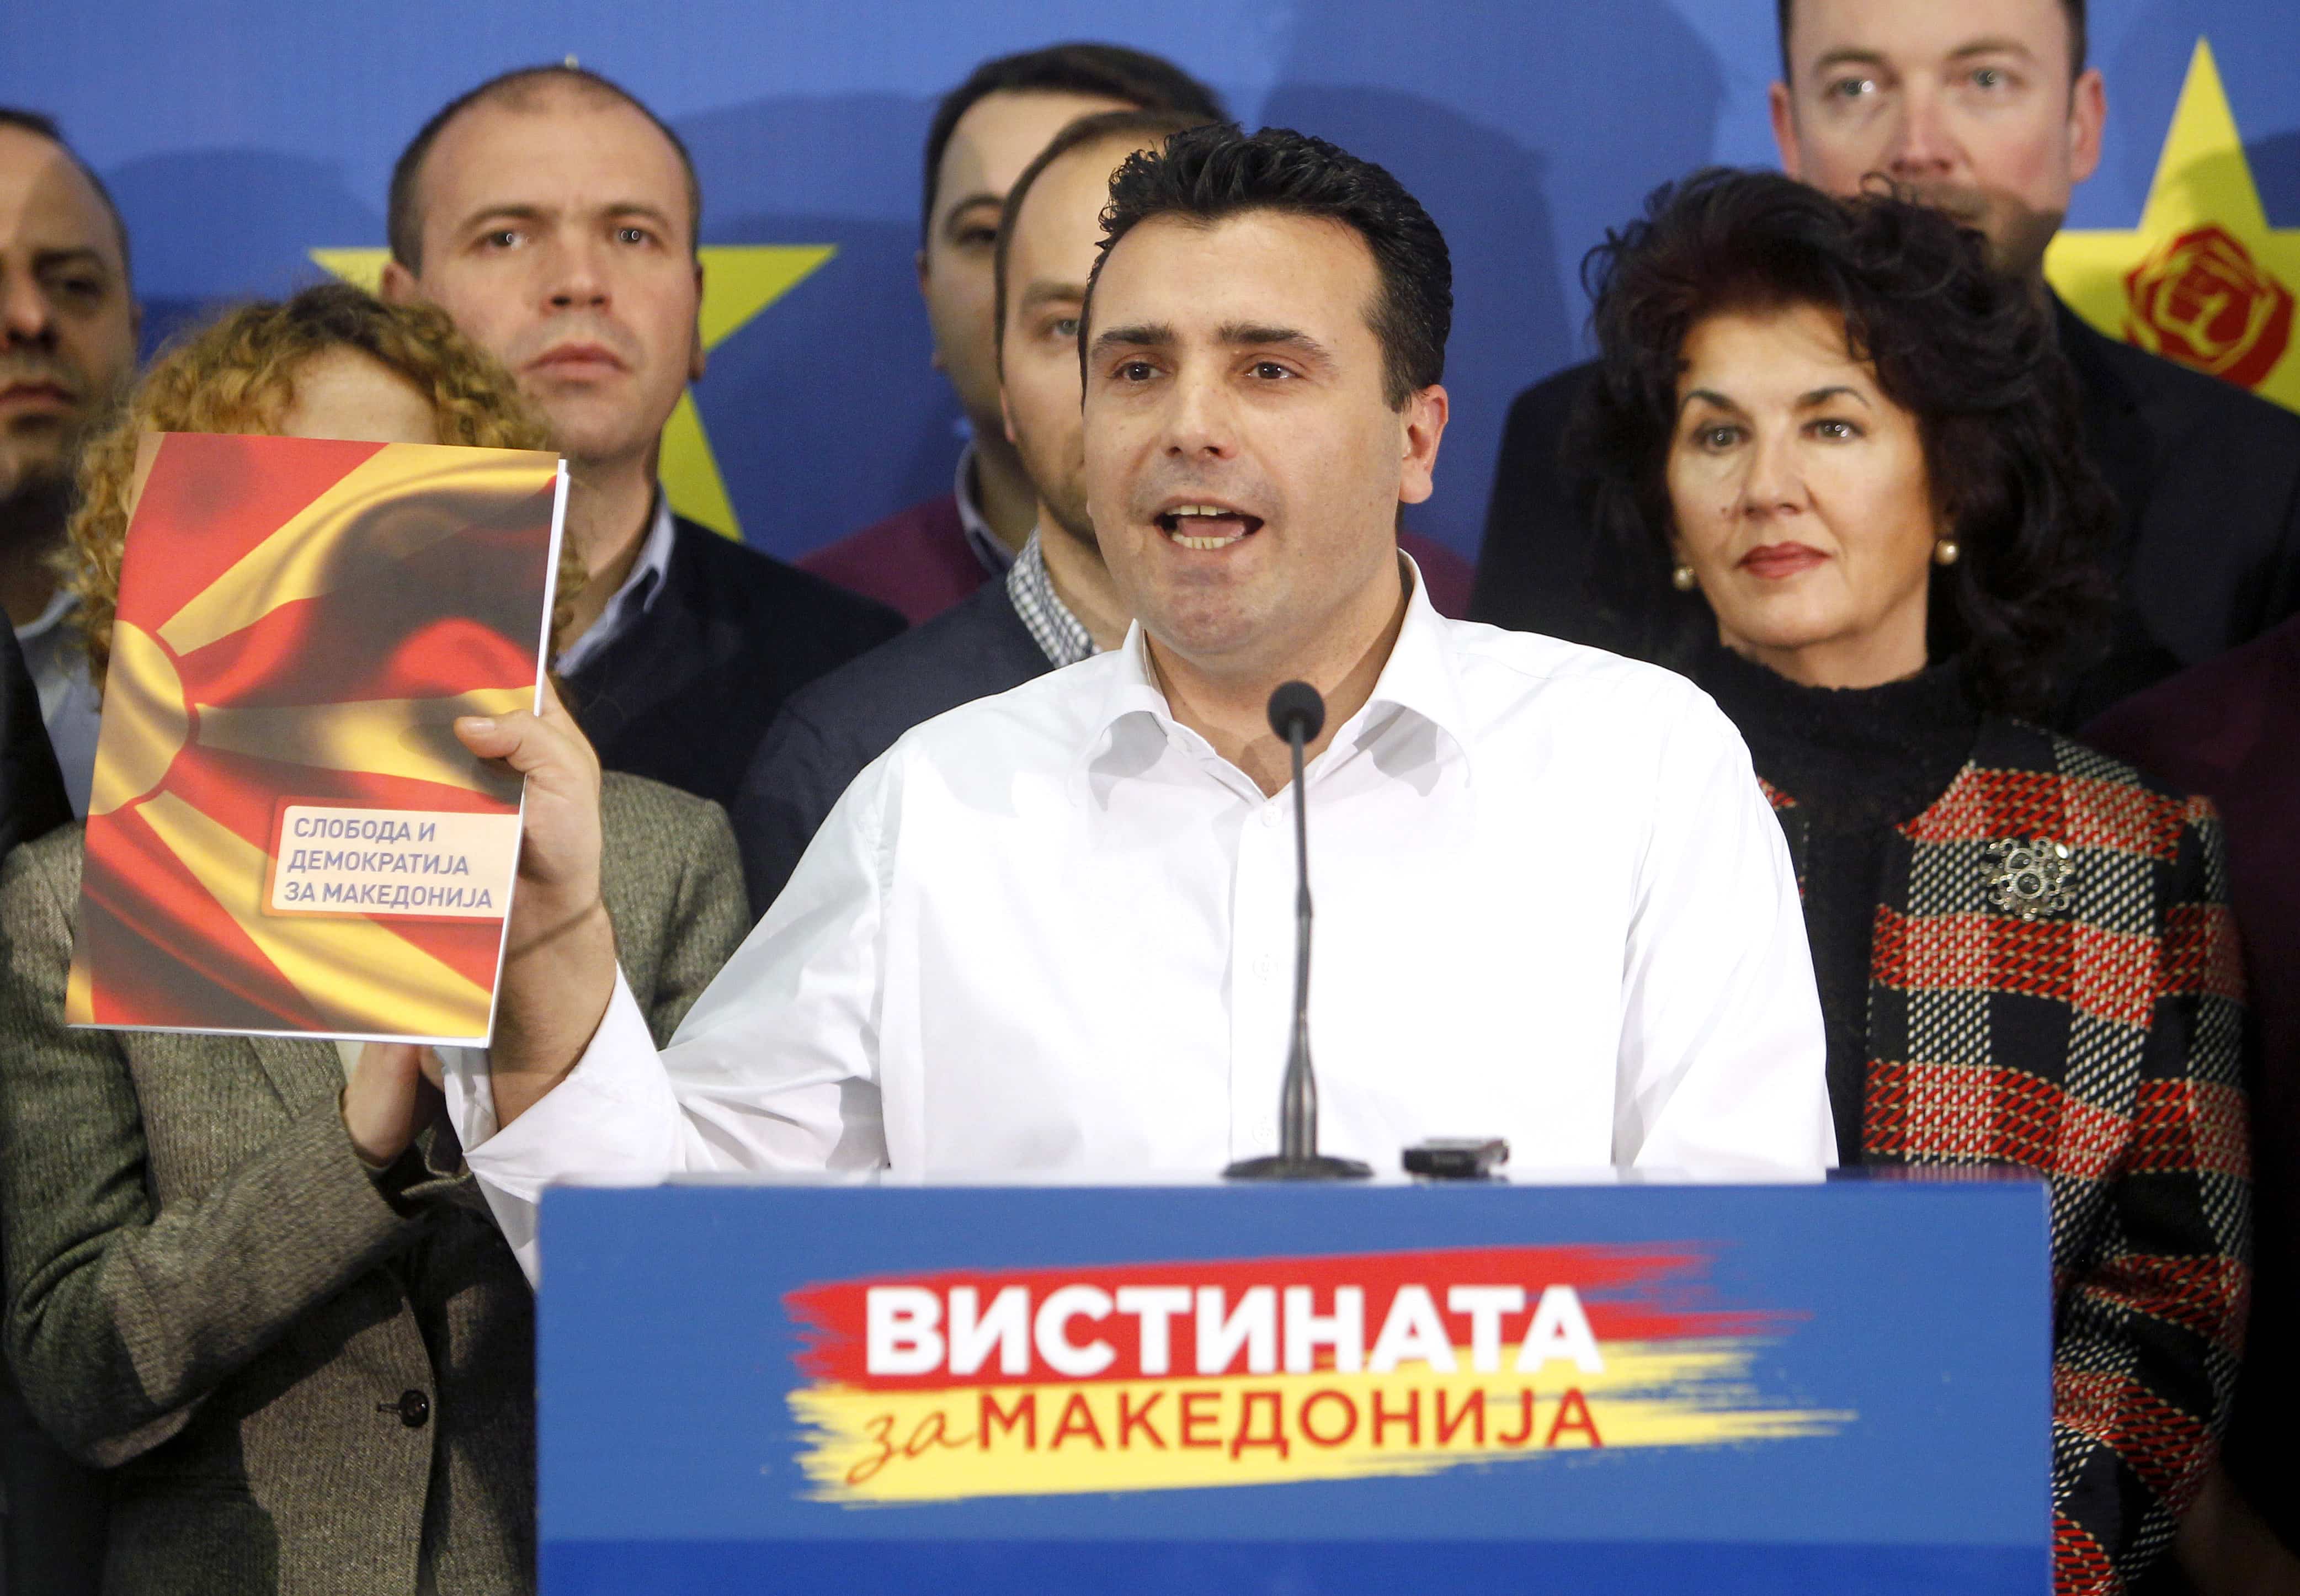 Zoran Zaev has accused the conservative government of carrying out illegal wiretaps on more than 20,000 people, including his own, and accused conservative Prime Minister Nikola Gruevski of heading the alleged surveillance operation, AP Photo/Boris Grdanoski